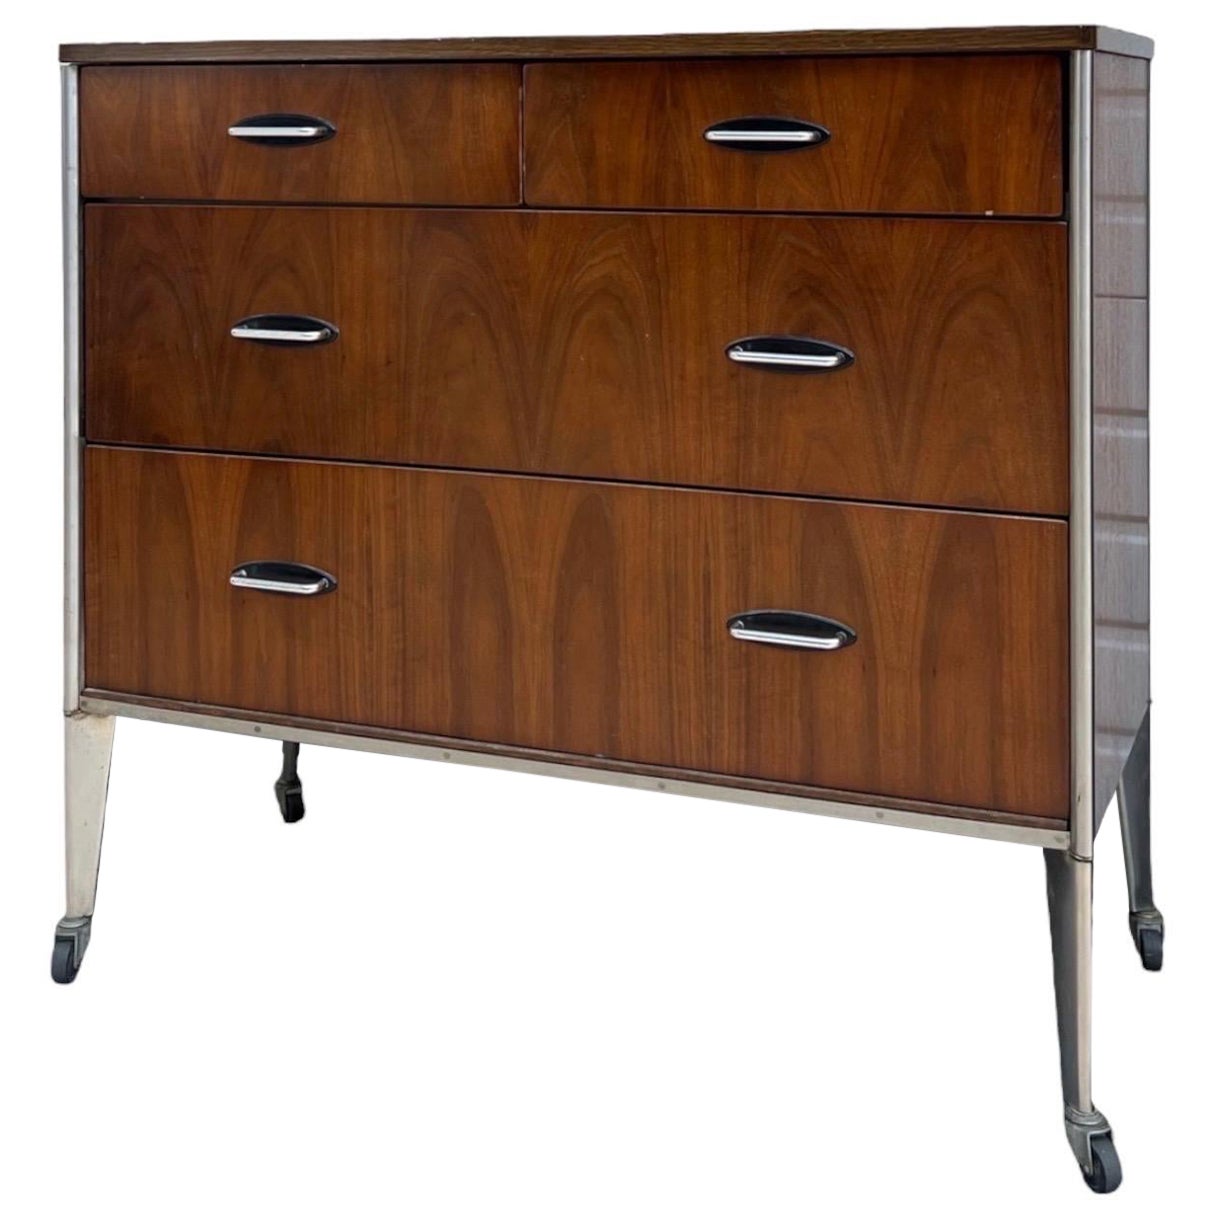 Vintage Mid Century Modern Dresser By Raymond Loewy For Hill Rom Walnut Casters  For Sale